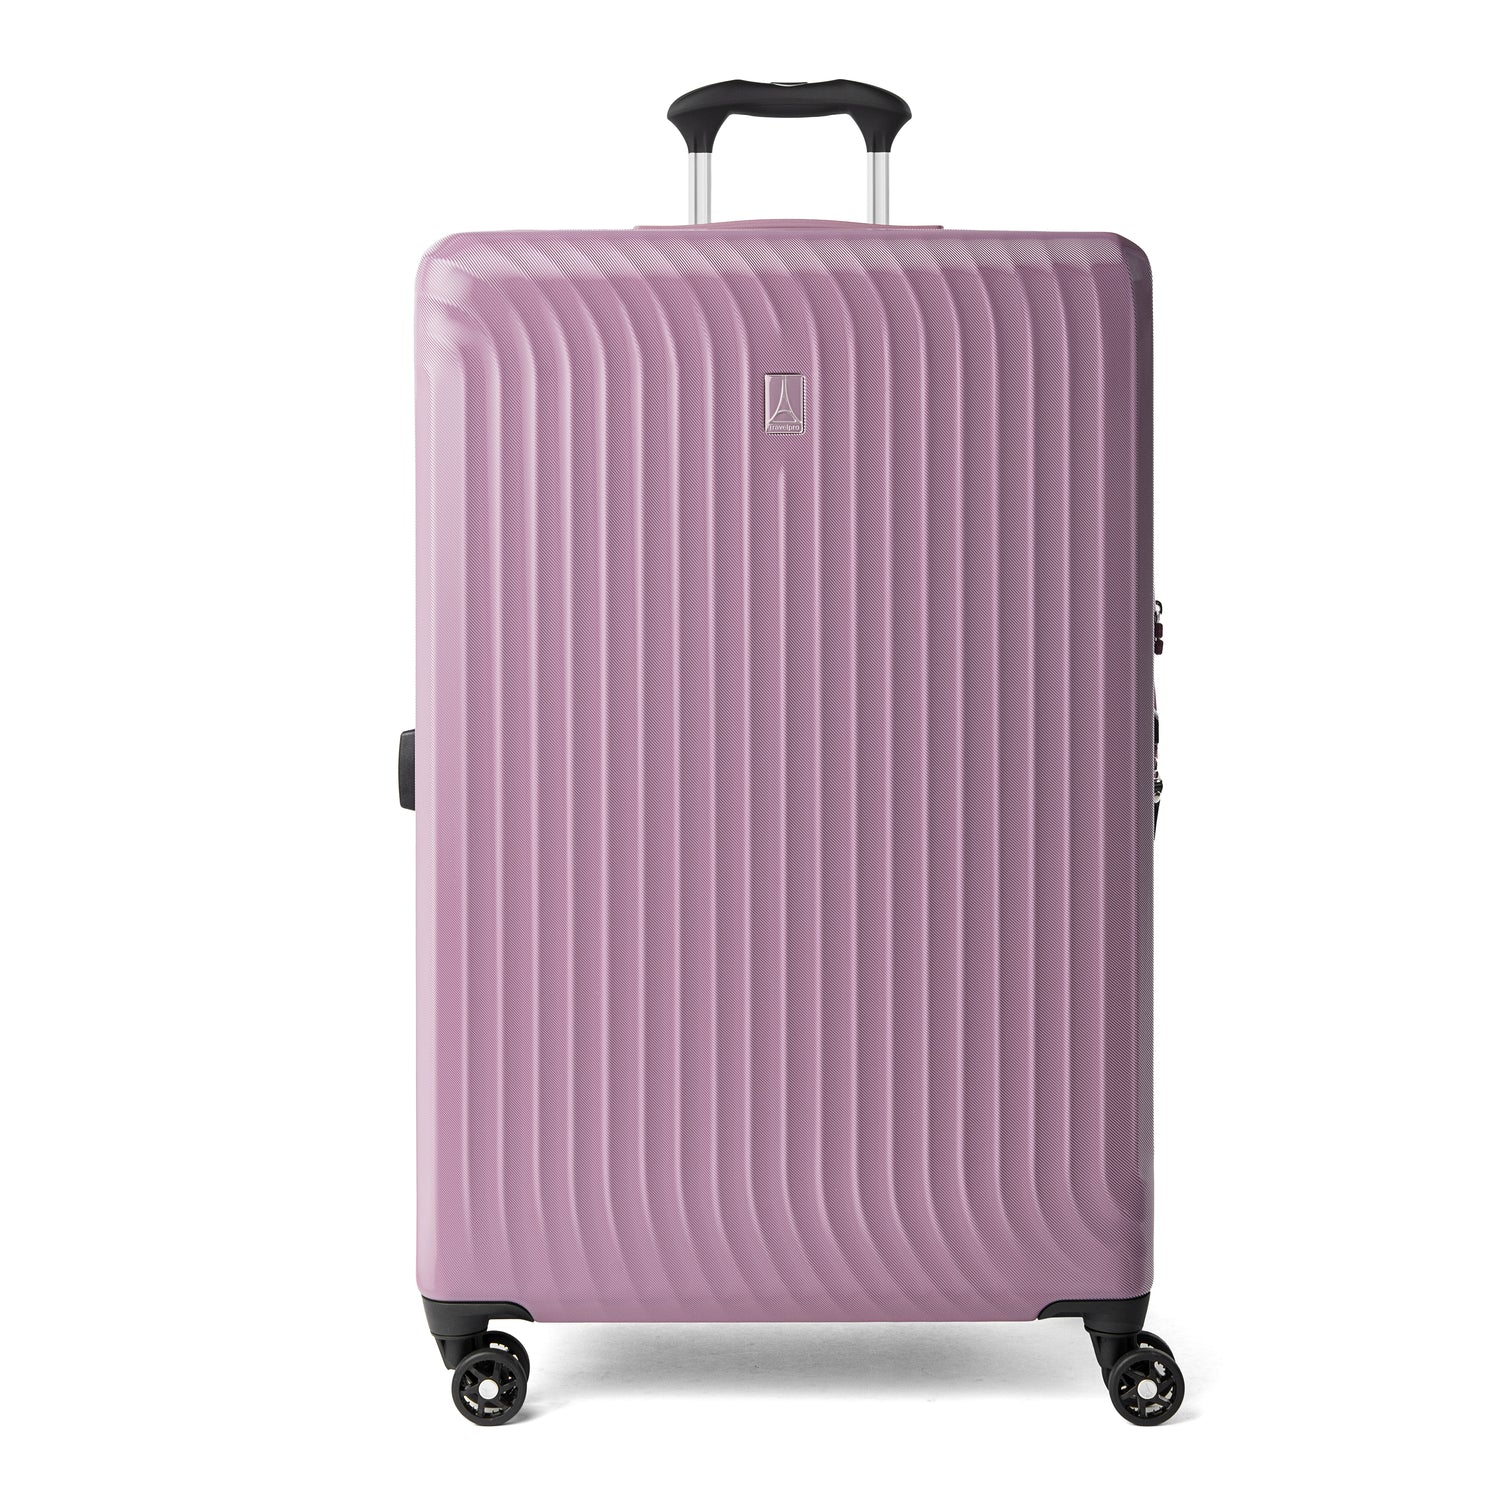 Travelpro Maxlite Air Large Check-in Expandable Hardside Spinner Luggage - Orchid